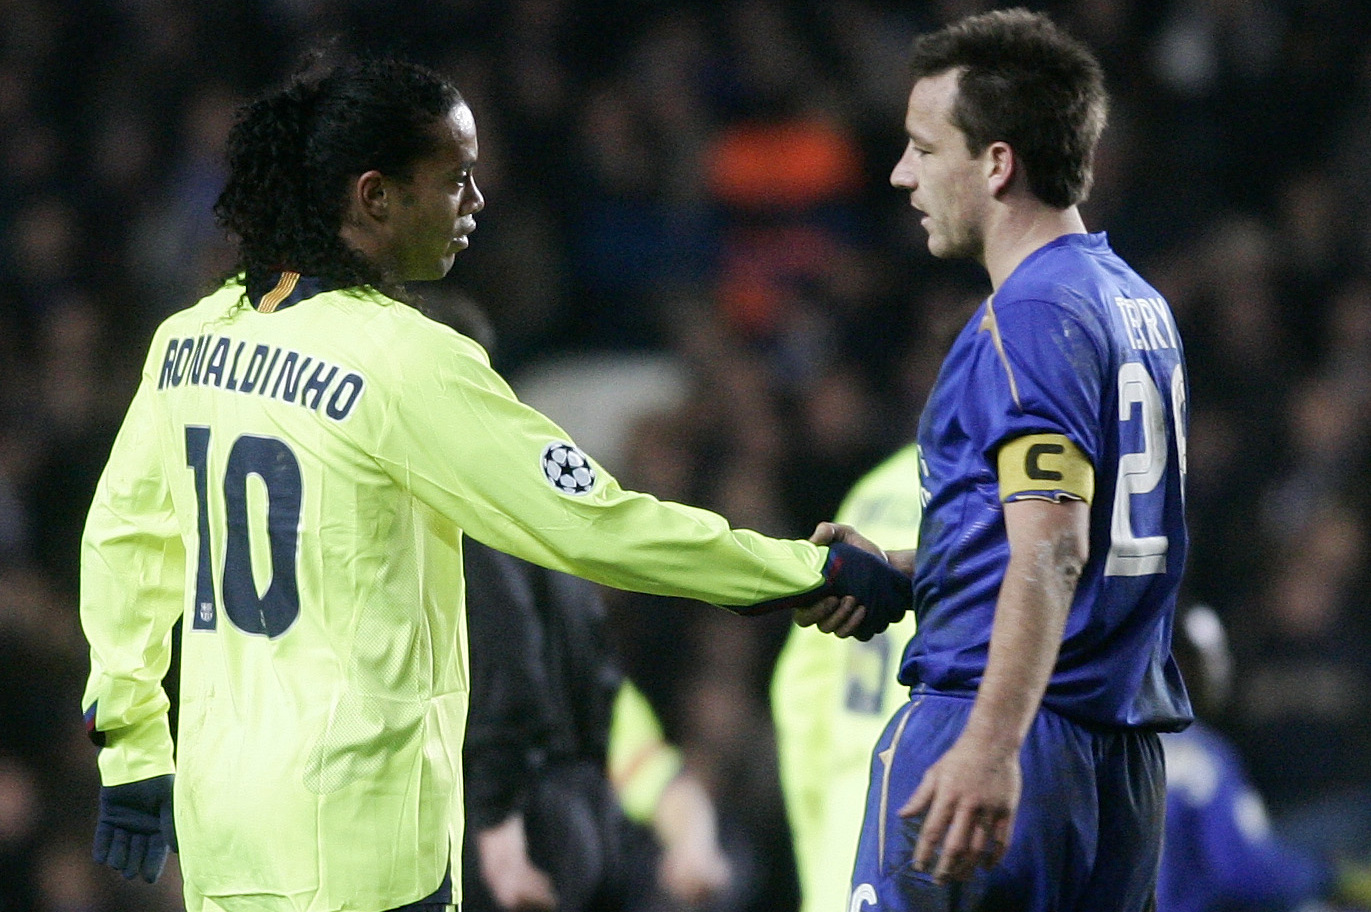 No Cristiano but 3 Chelsea Players in Ronaldinho's Champions League Dream Team | News, Scores, Highlights, Stats, and Rumors | Bleacher Report